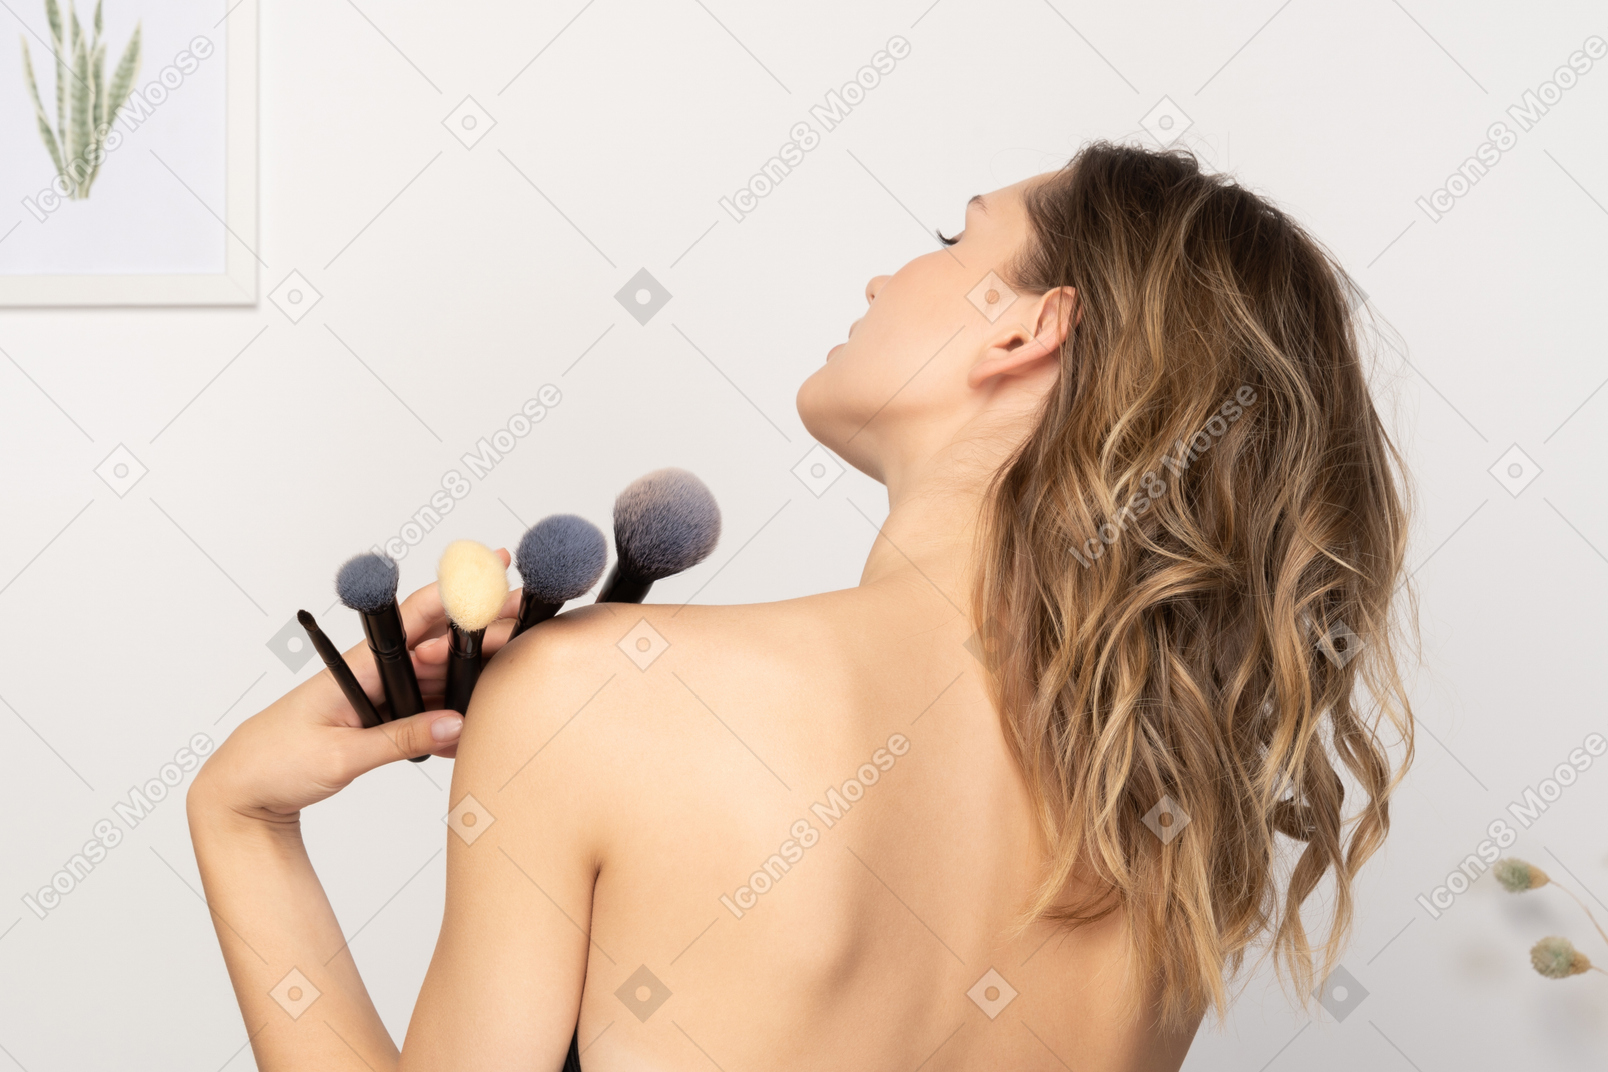 Back view of a sensual young woman holding make-up brushes